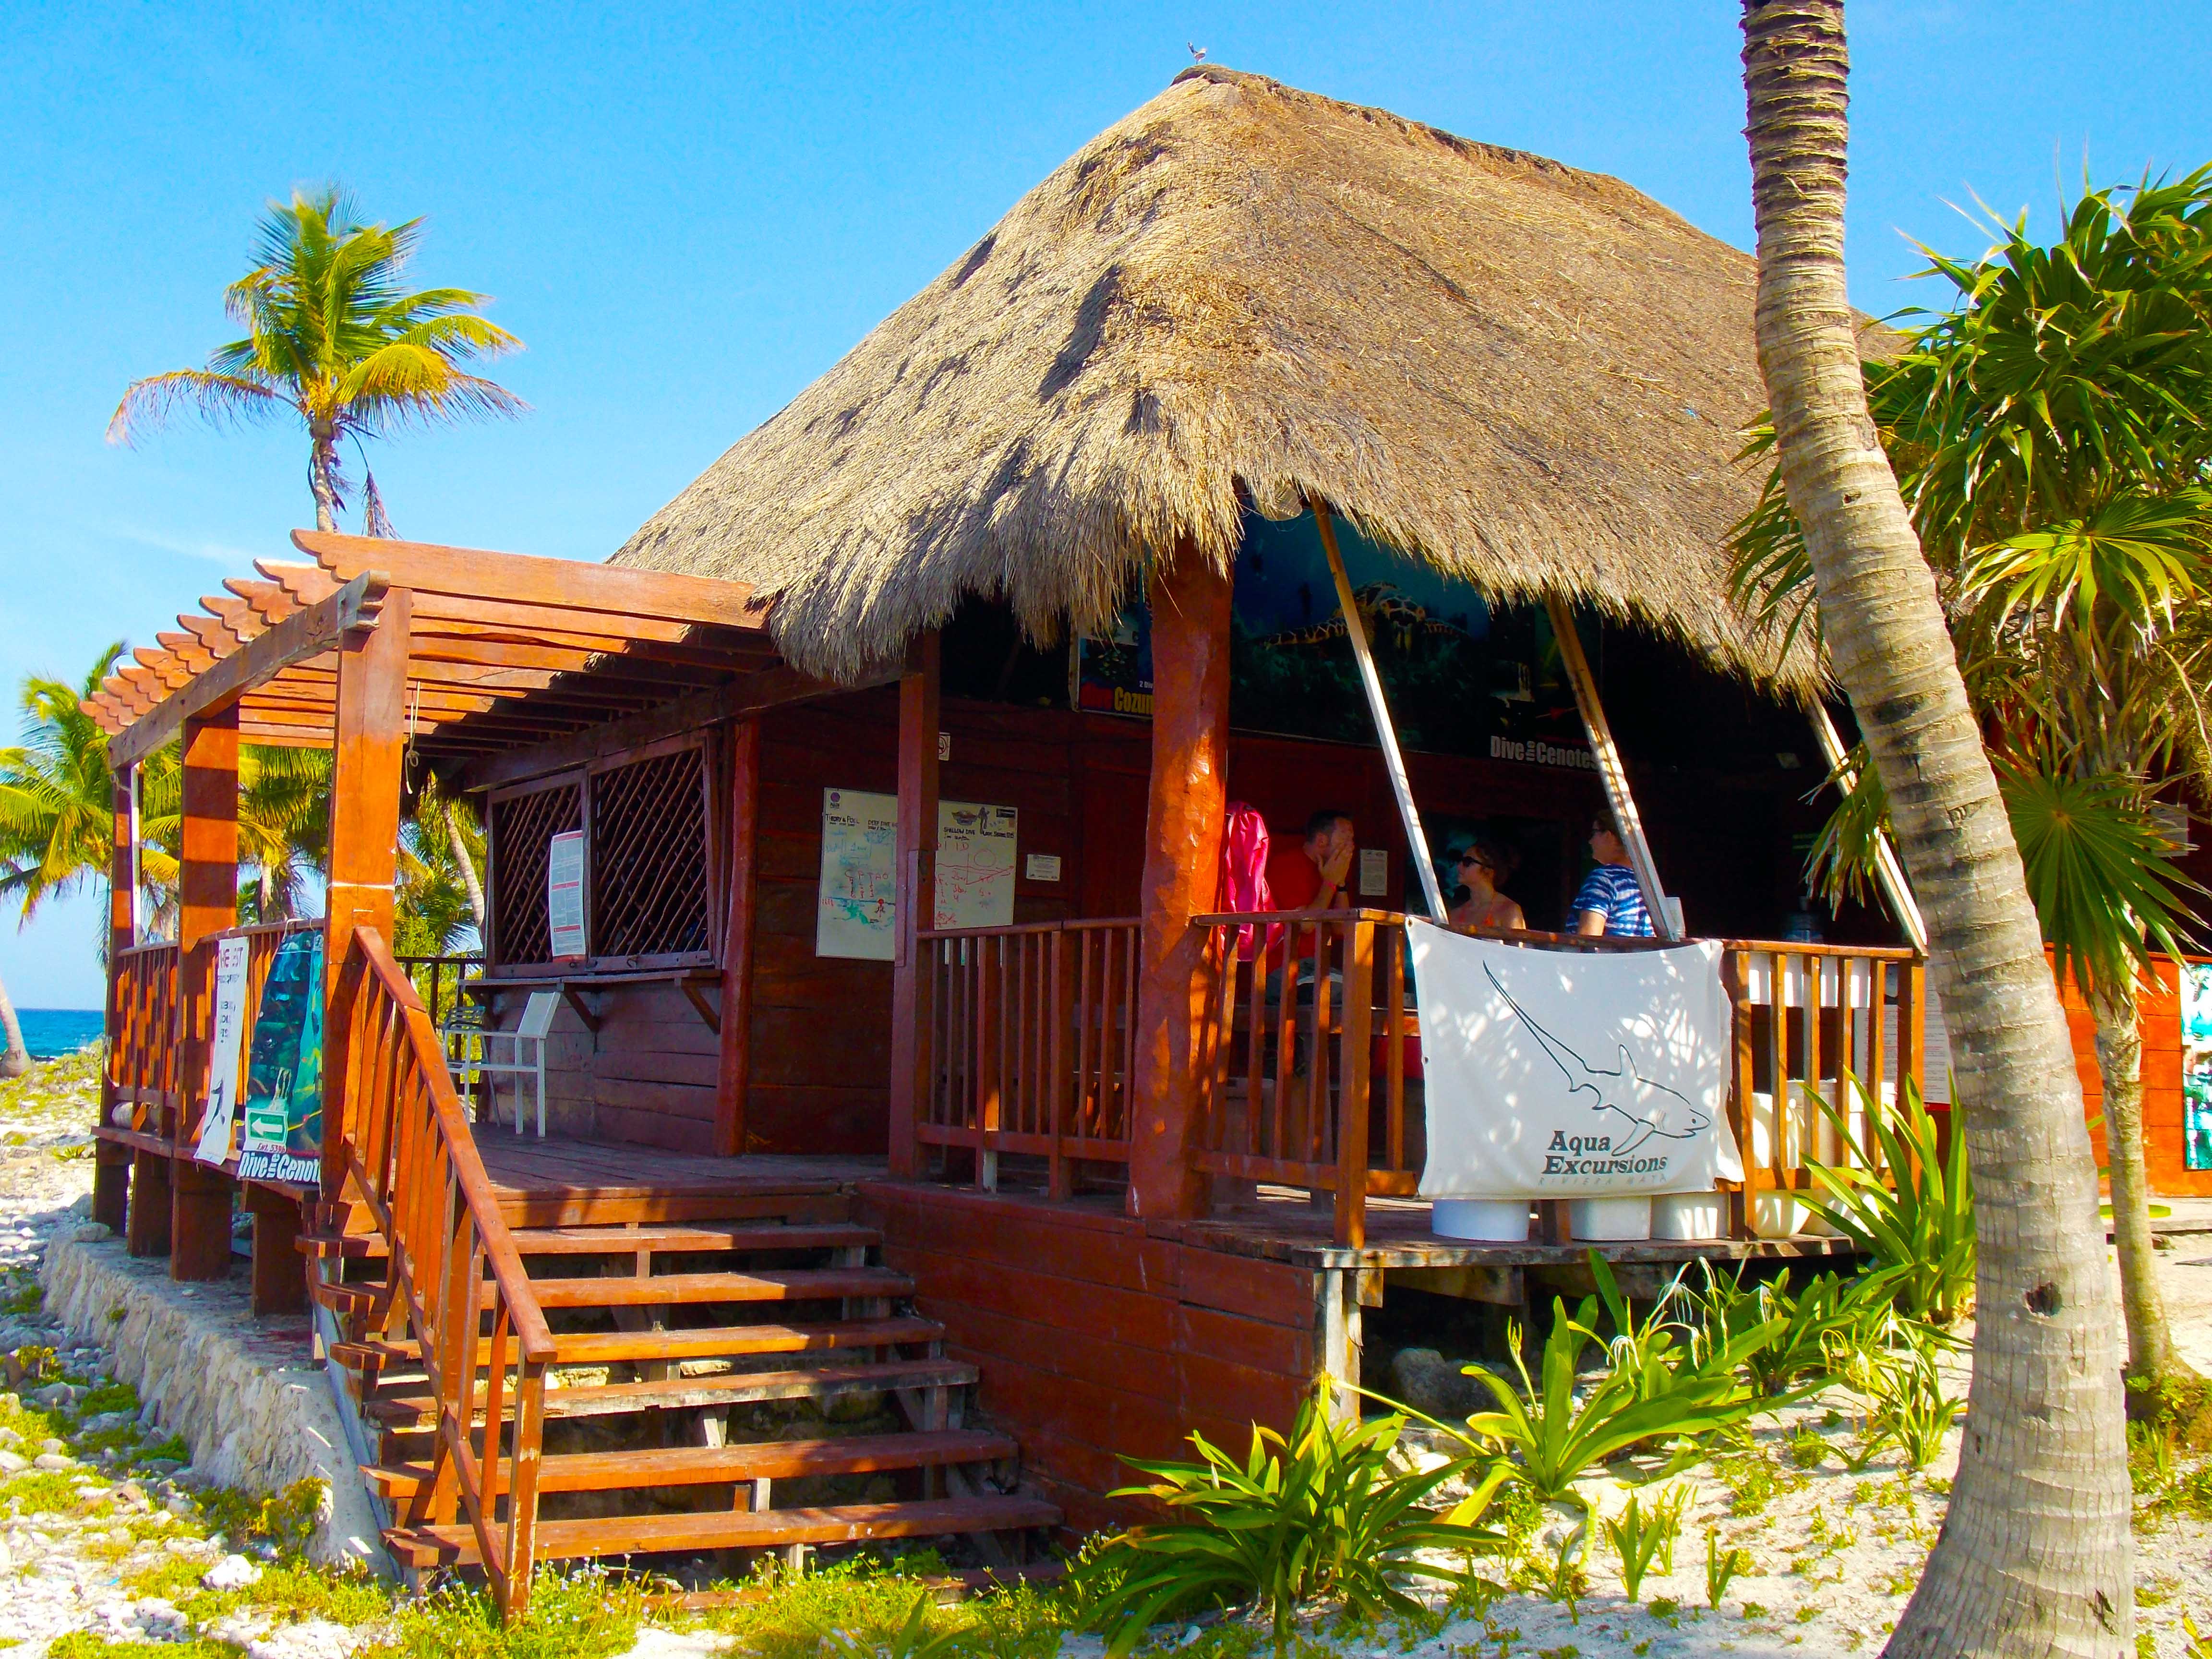 You will find us in the big cool “palapa” at the right hand side of the beach!